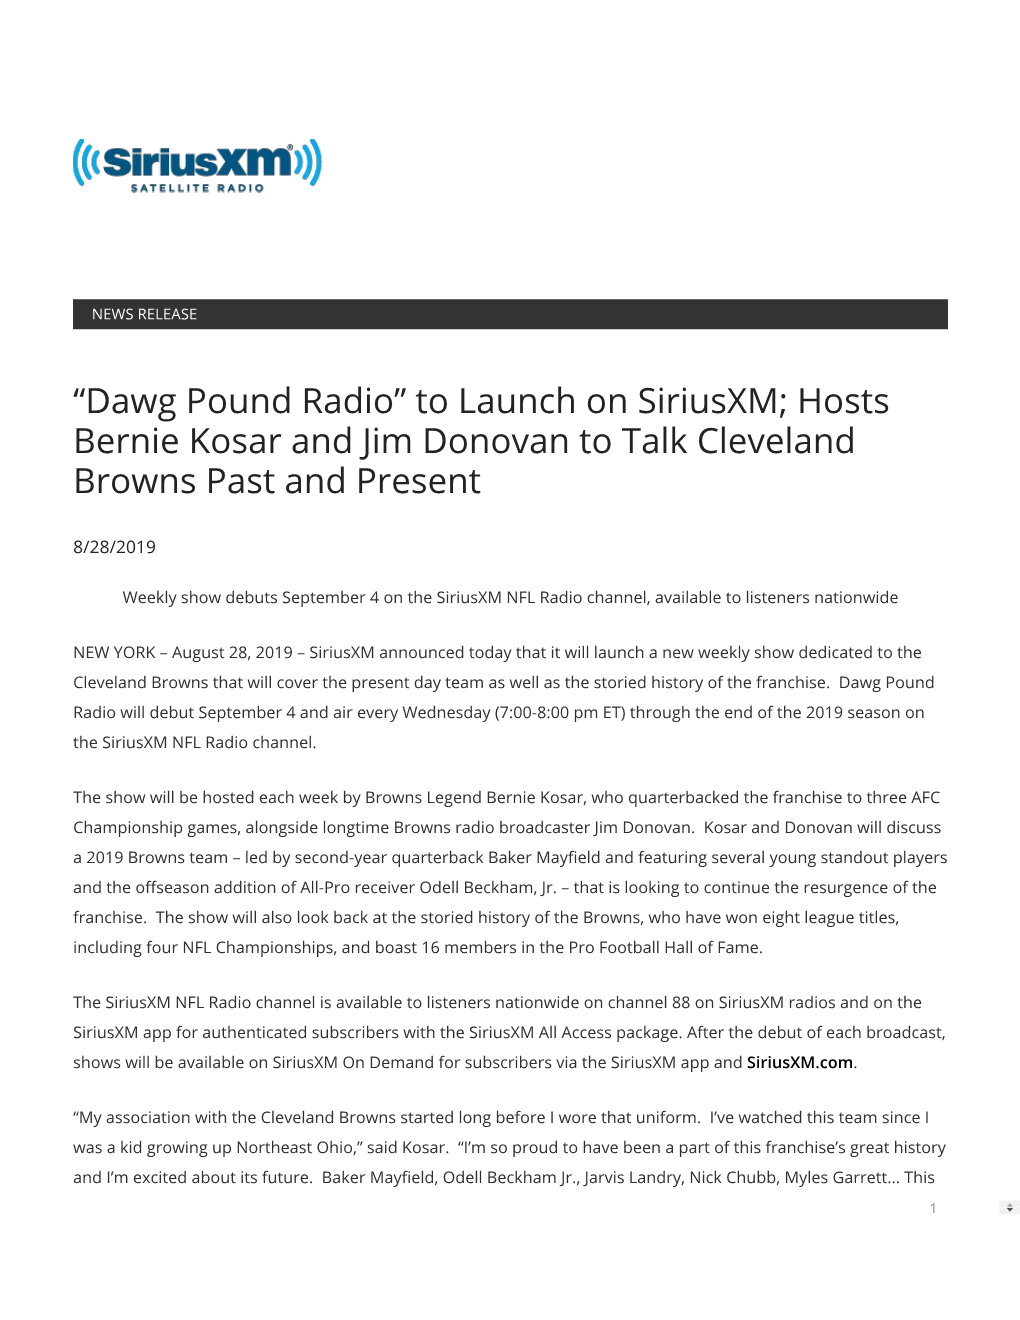 “Dawg Pound Radio” to Launch on Siriusxm; Hosts Bernie Kosar and Jim Donovan to Talk Cleveland Browns Past and Present